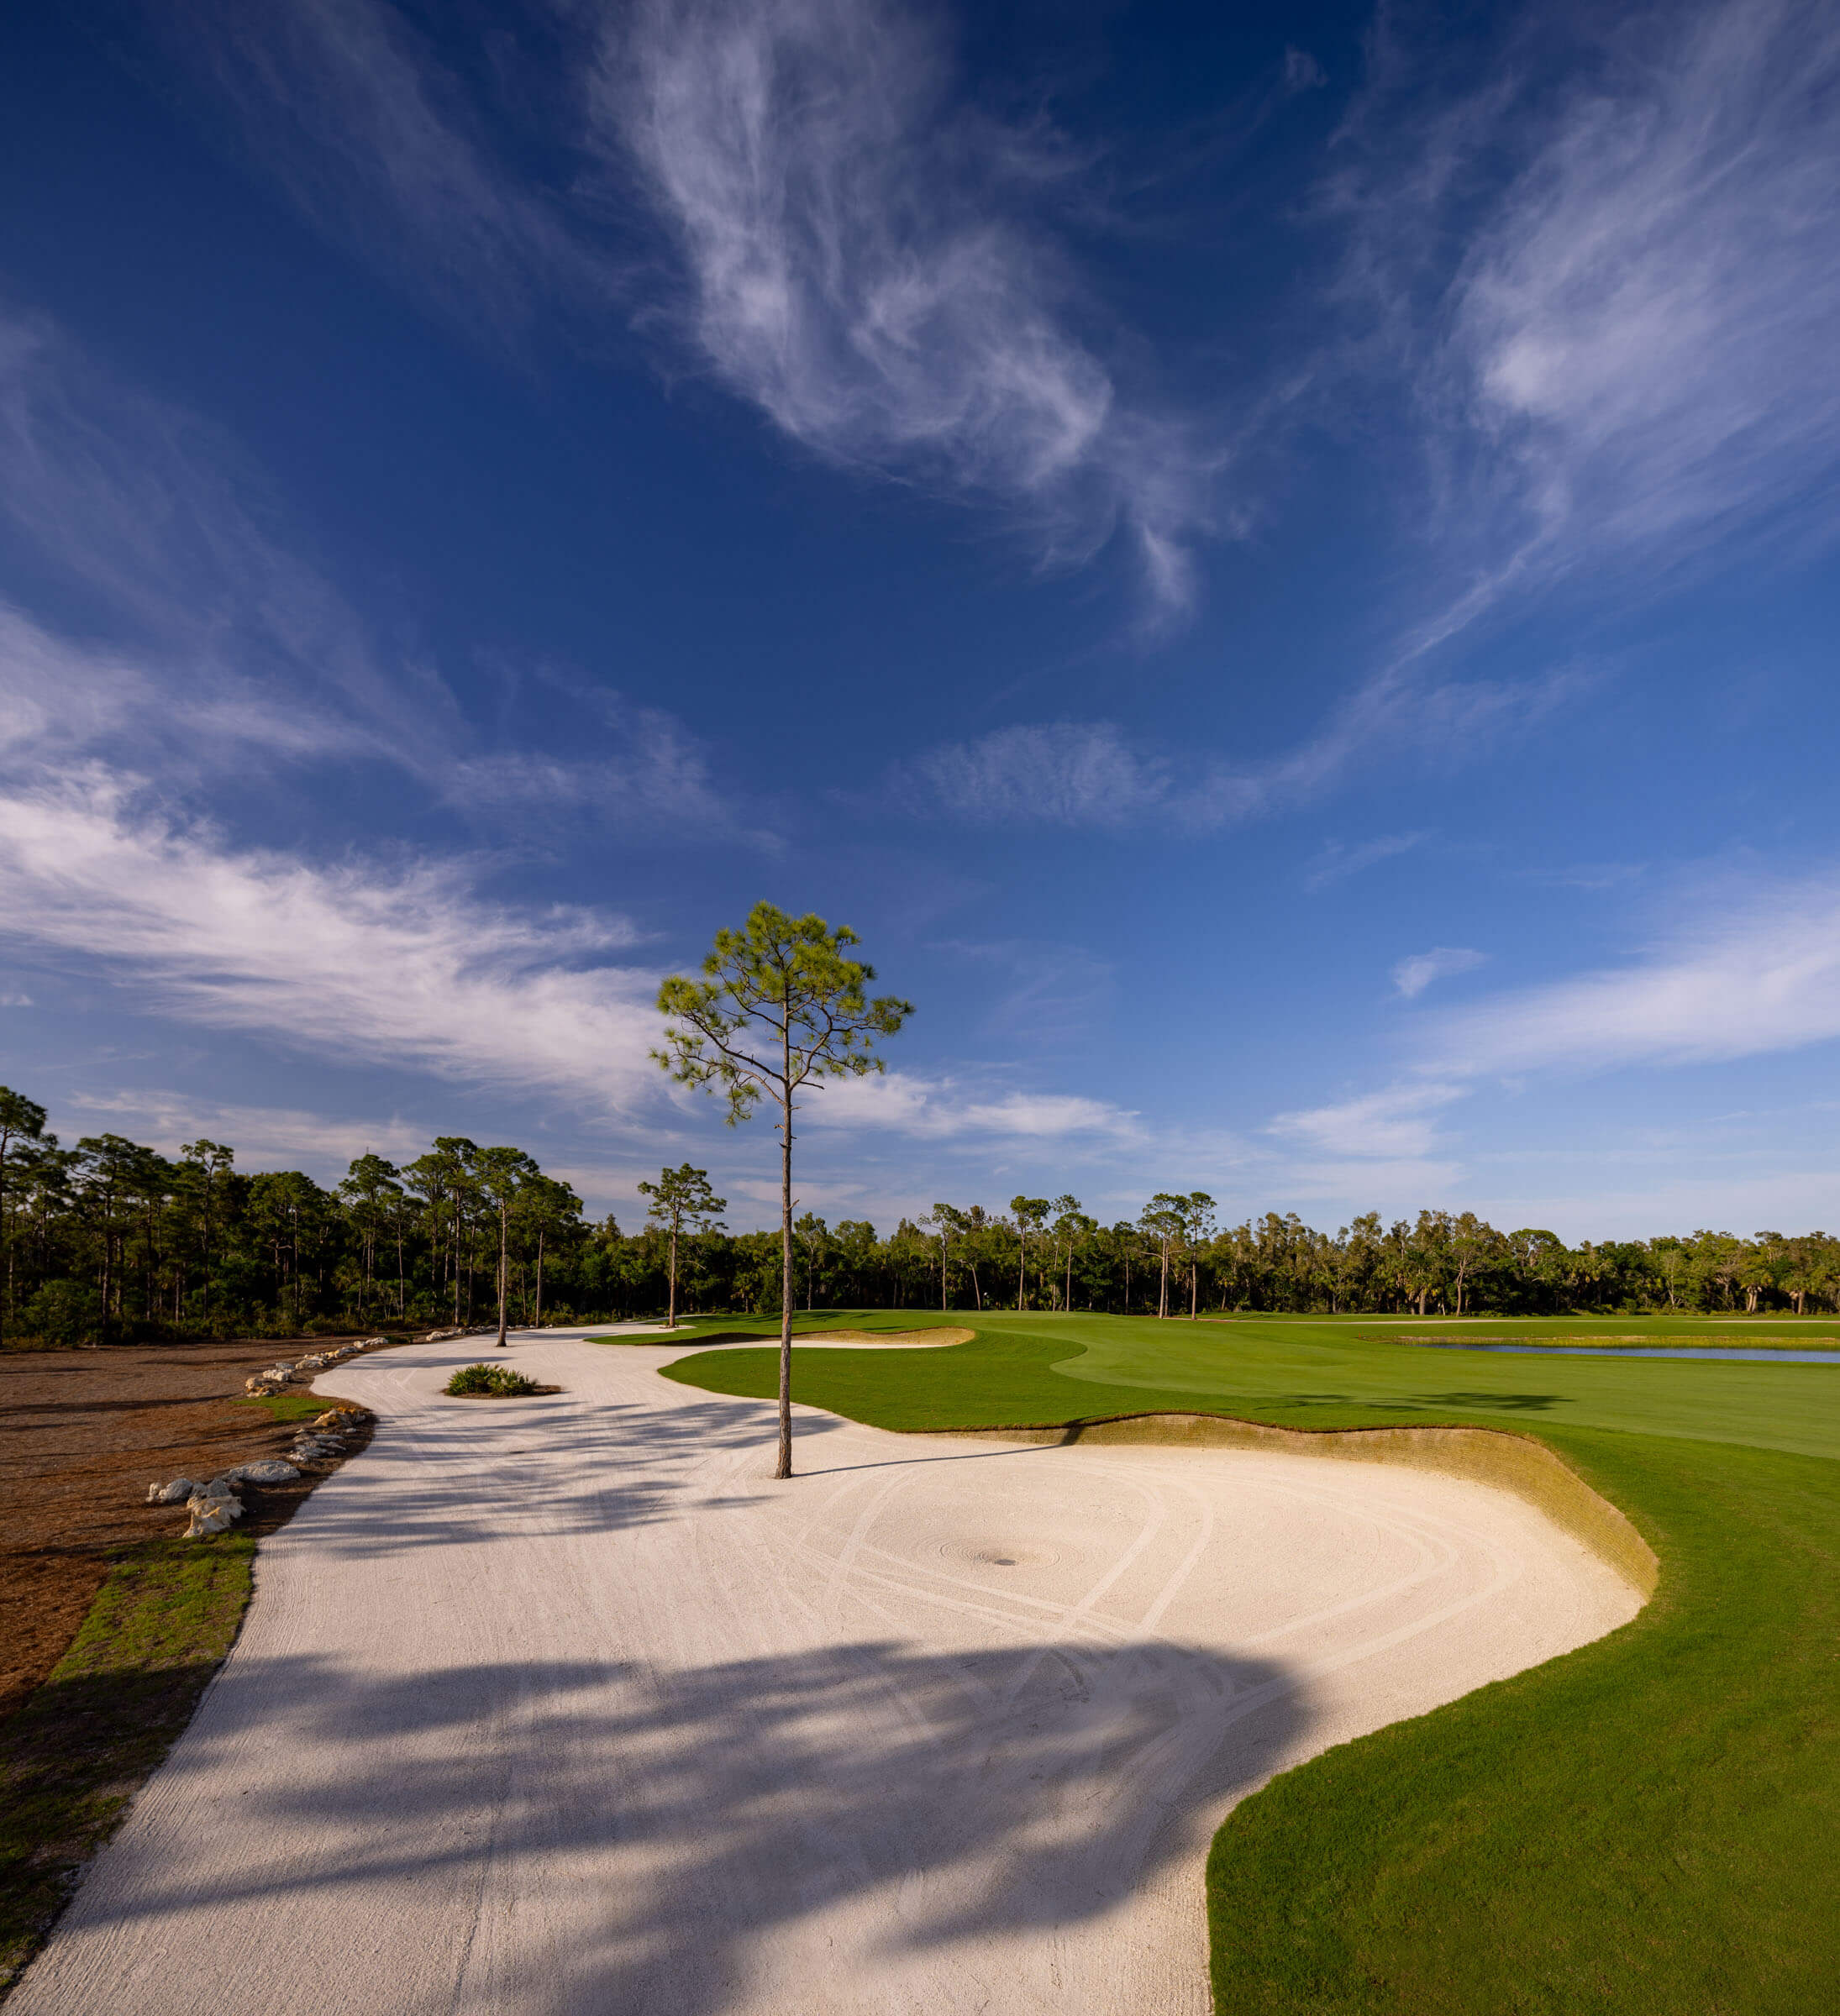 A solitary tree stands beside a sand bunker on a golf course, with a vivid blue sky and sweeping clouds above.